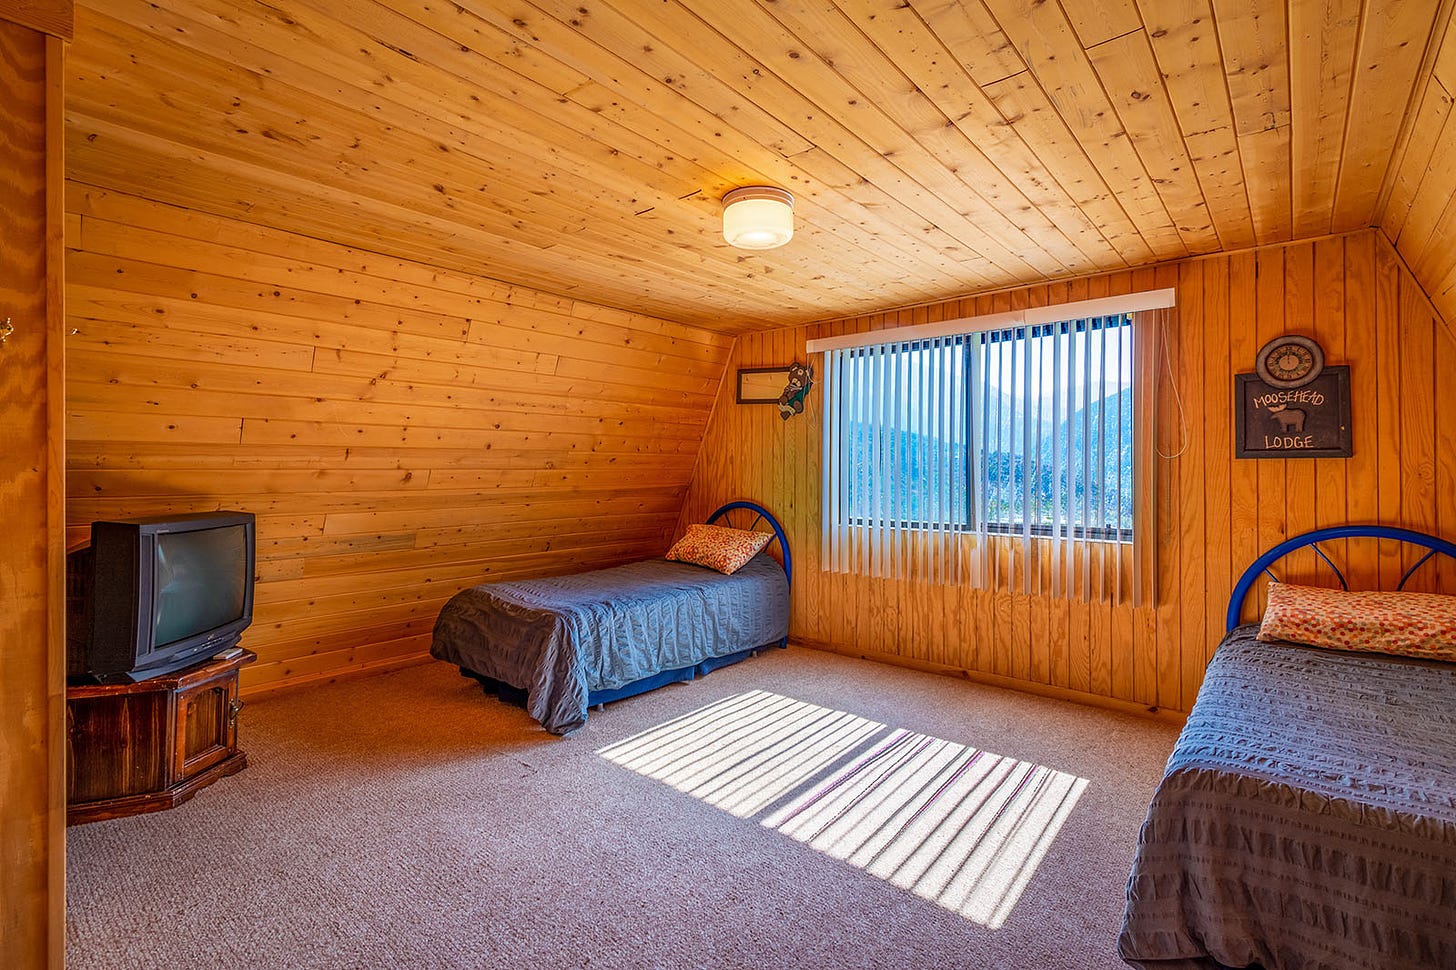 A bedroom inside a cabin in the woods